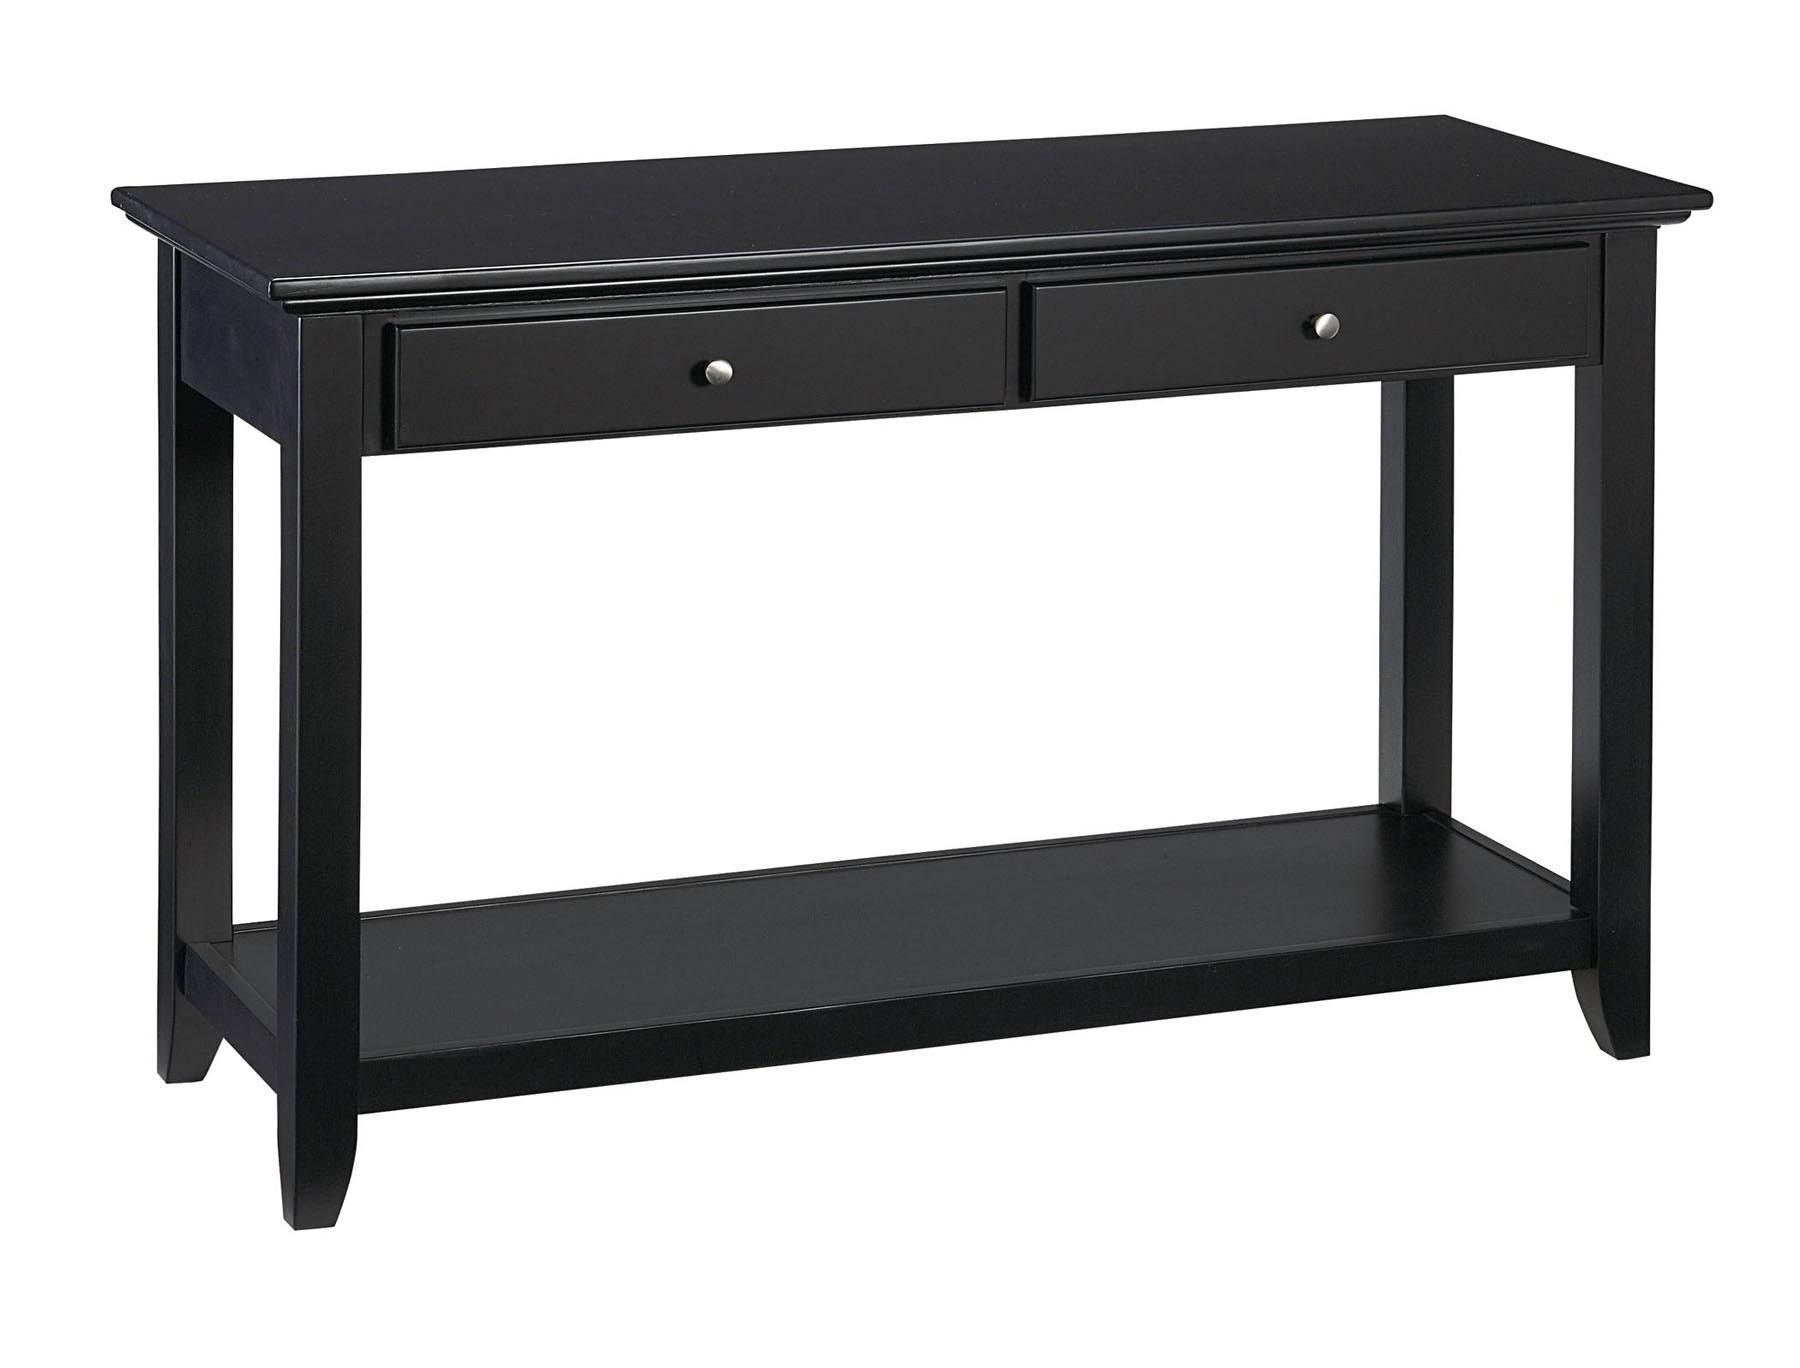 Black Sofa Console Table | Hawk Haven Within Aged Black Console Tables (View 5 of 20)